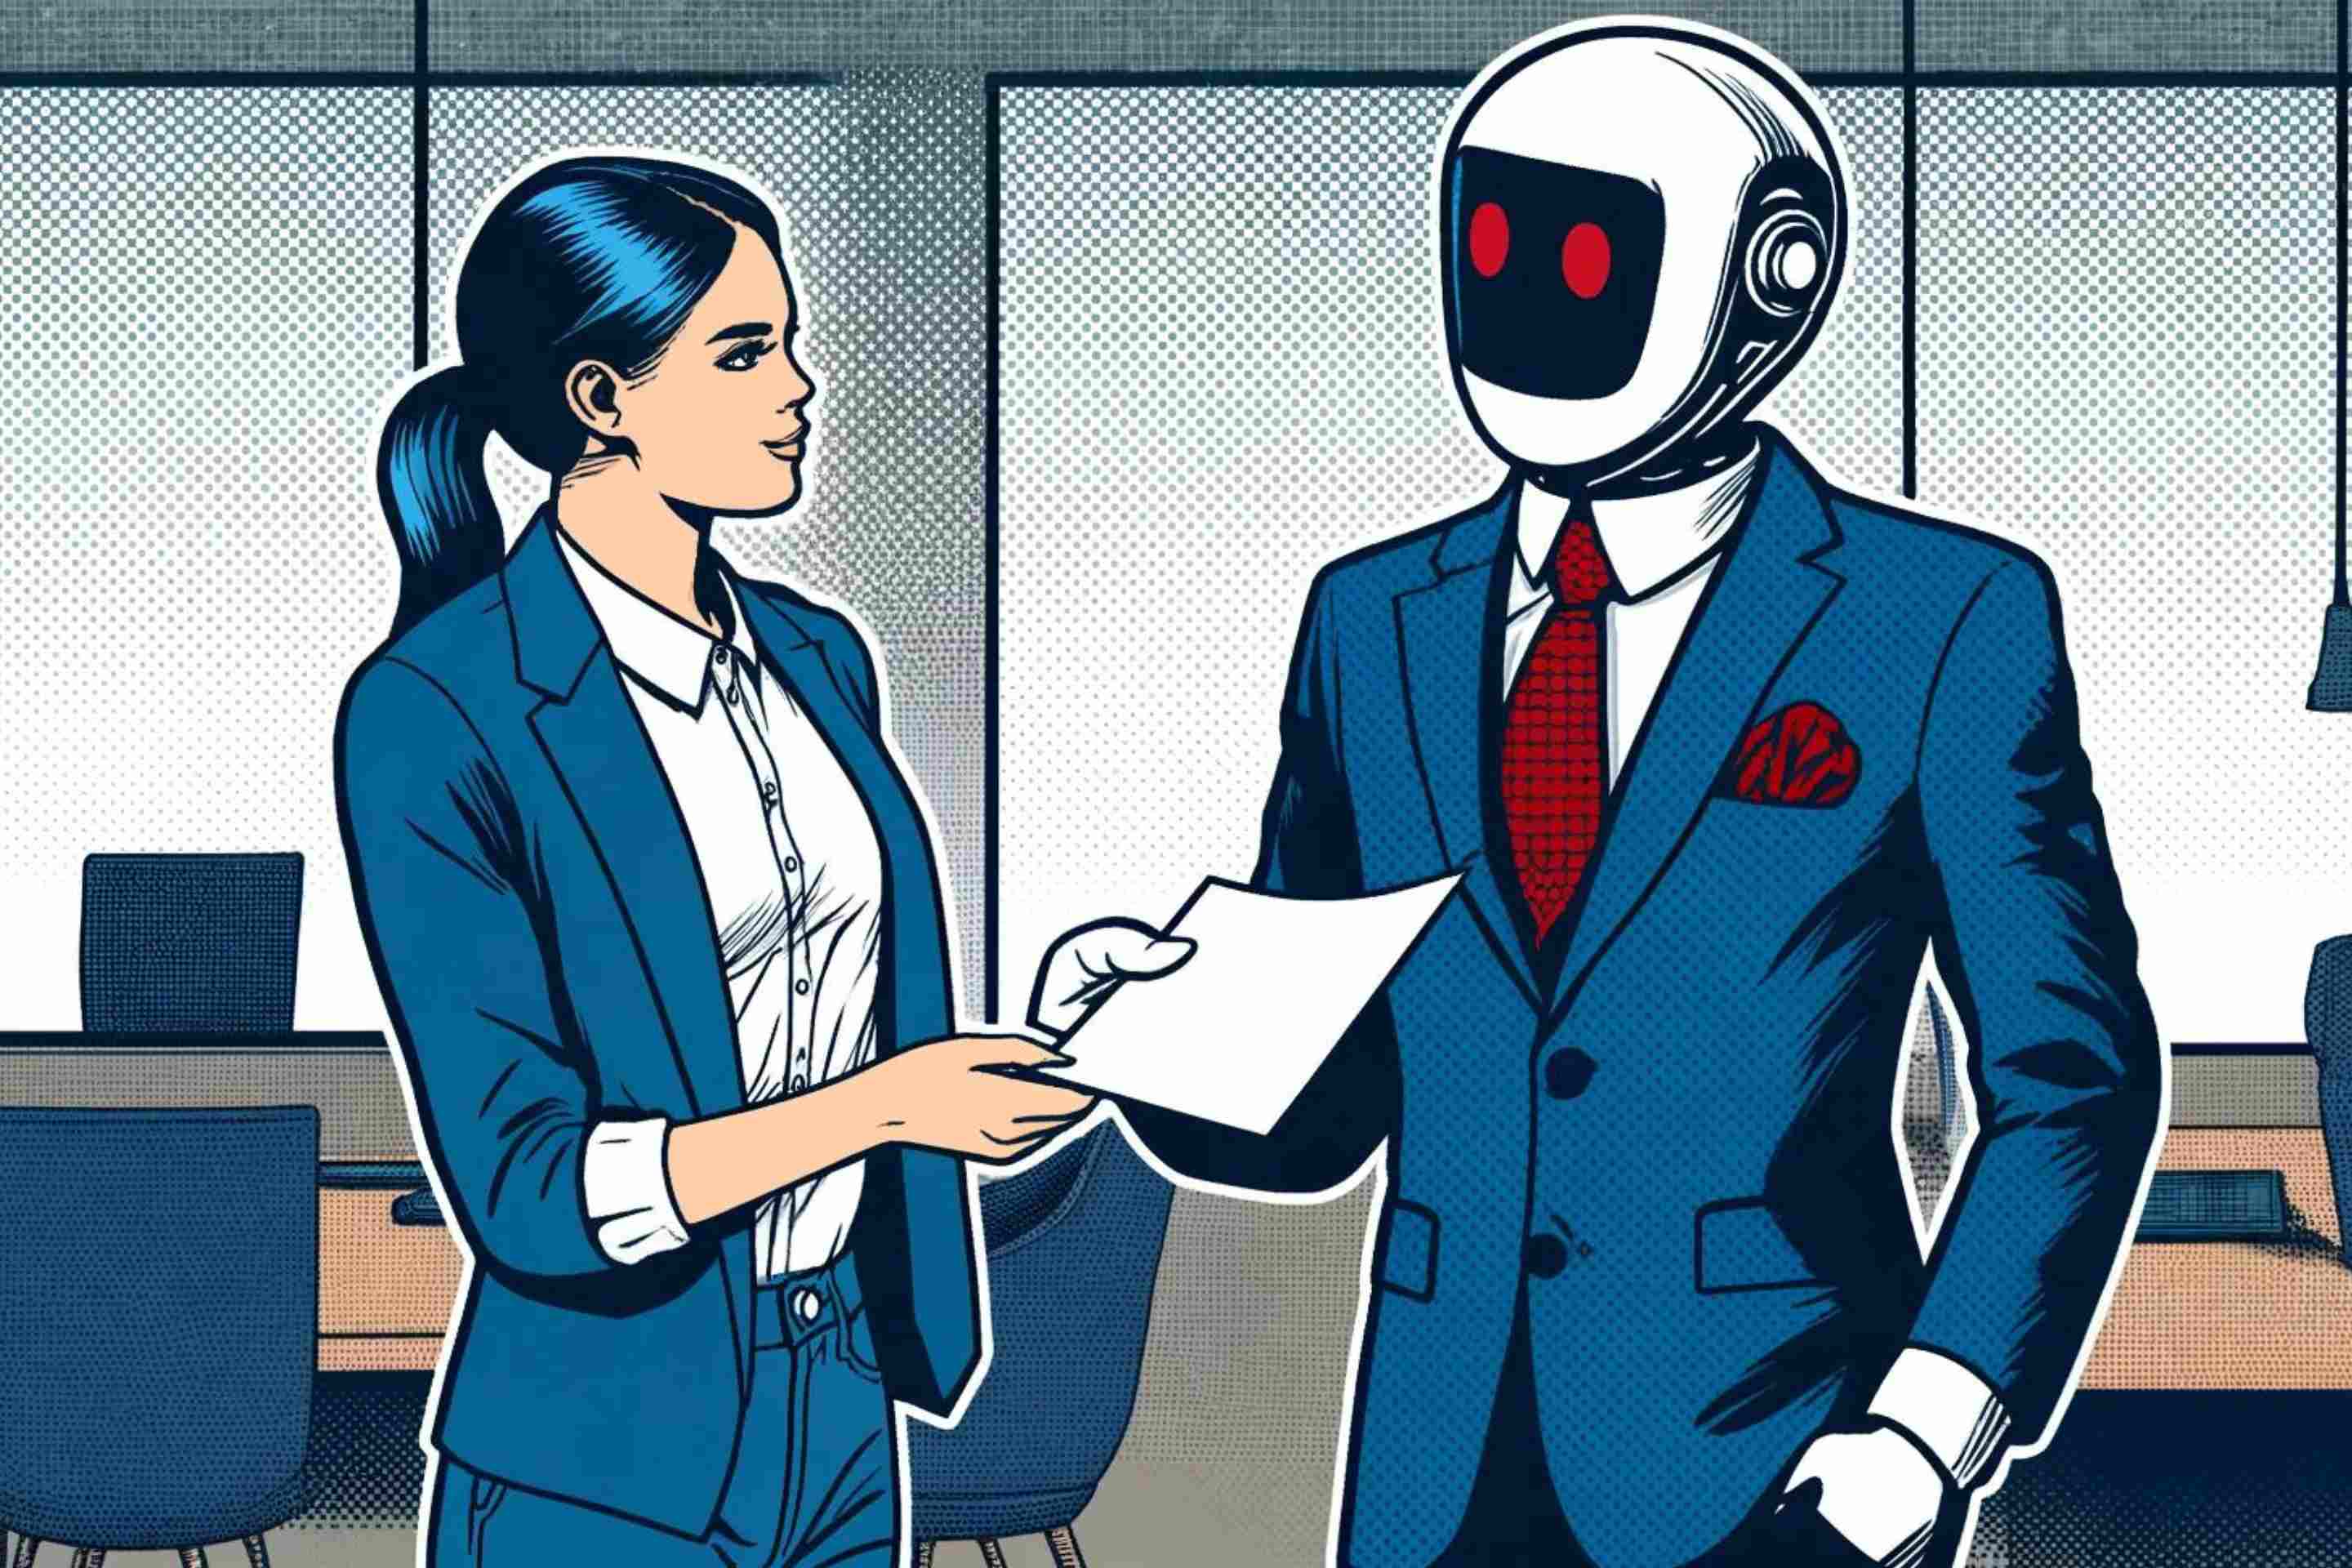 a robot handing over a piece of paper to a woman